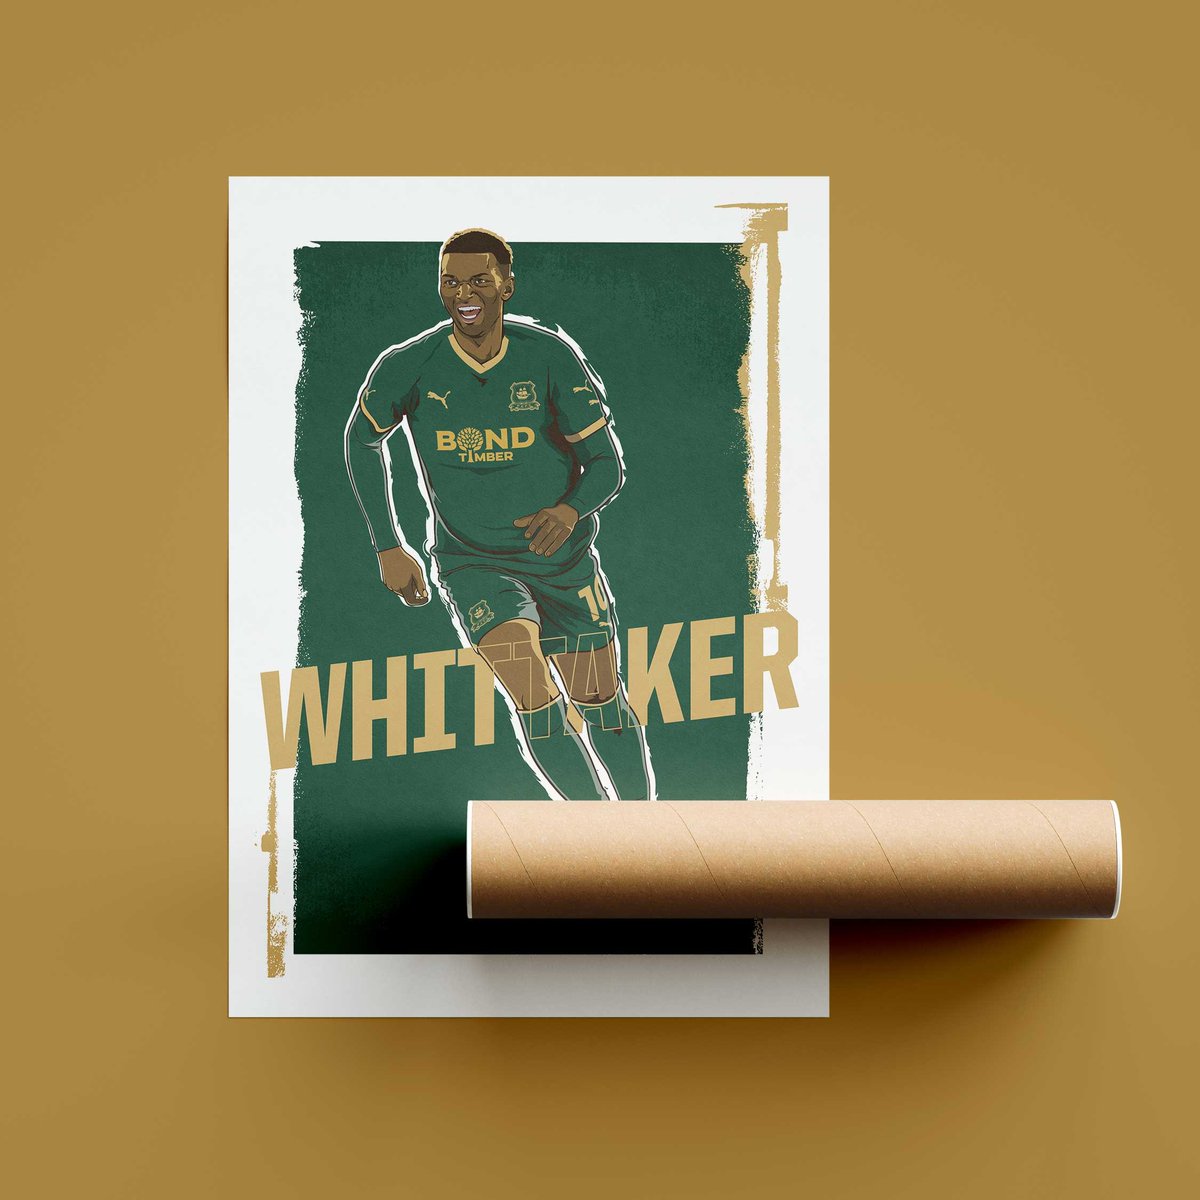 💚💛 Argyle poster giveaway 💚💛 We've got a number of Morgan Whittaker posters to giveaway to celebrate Argyle stopping 🆙 All you have to do is RT this post and we'll choose some winners this week. If you get impatient there's always 👉 tinyurl.com/2nbfs643 #geddon